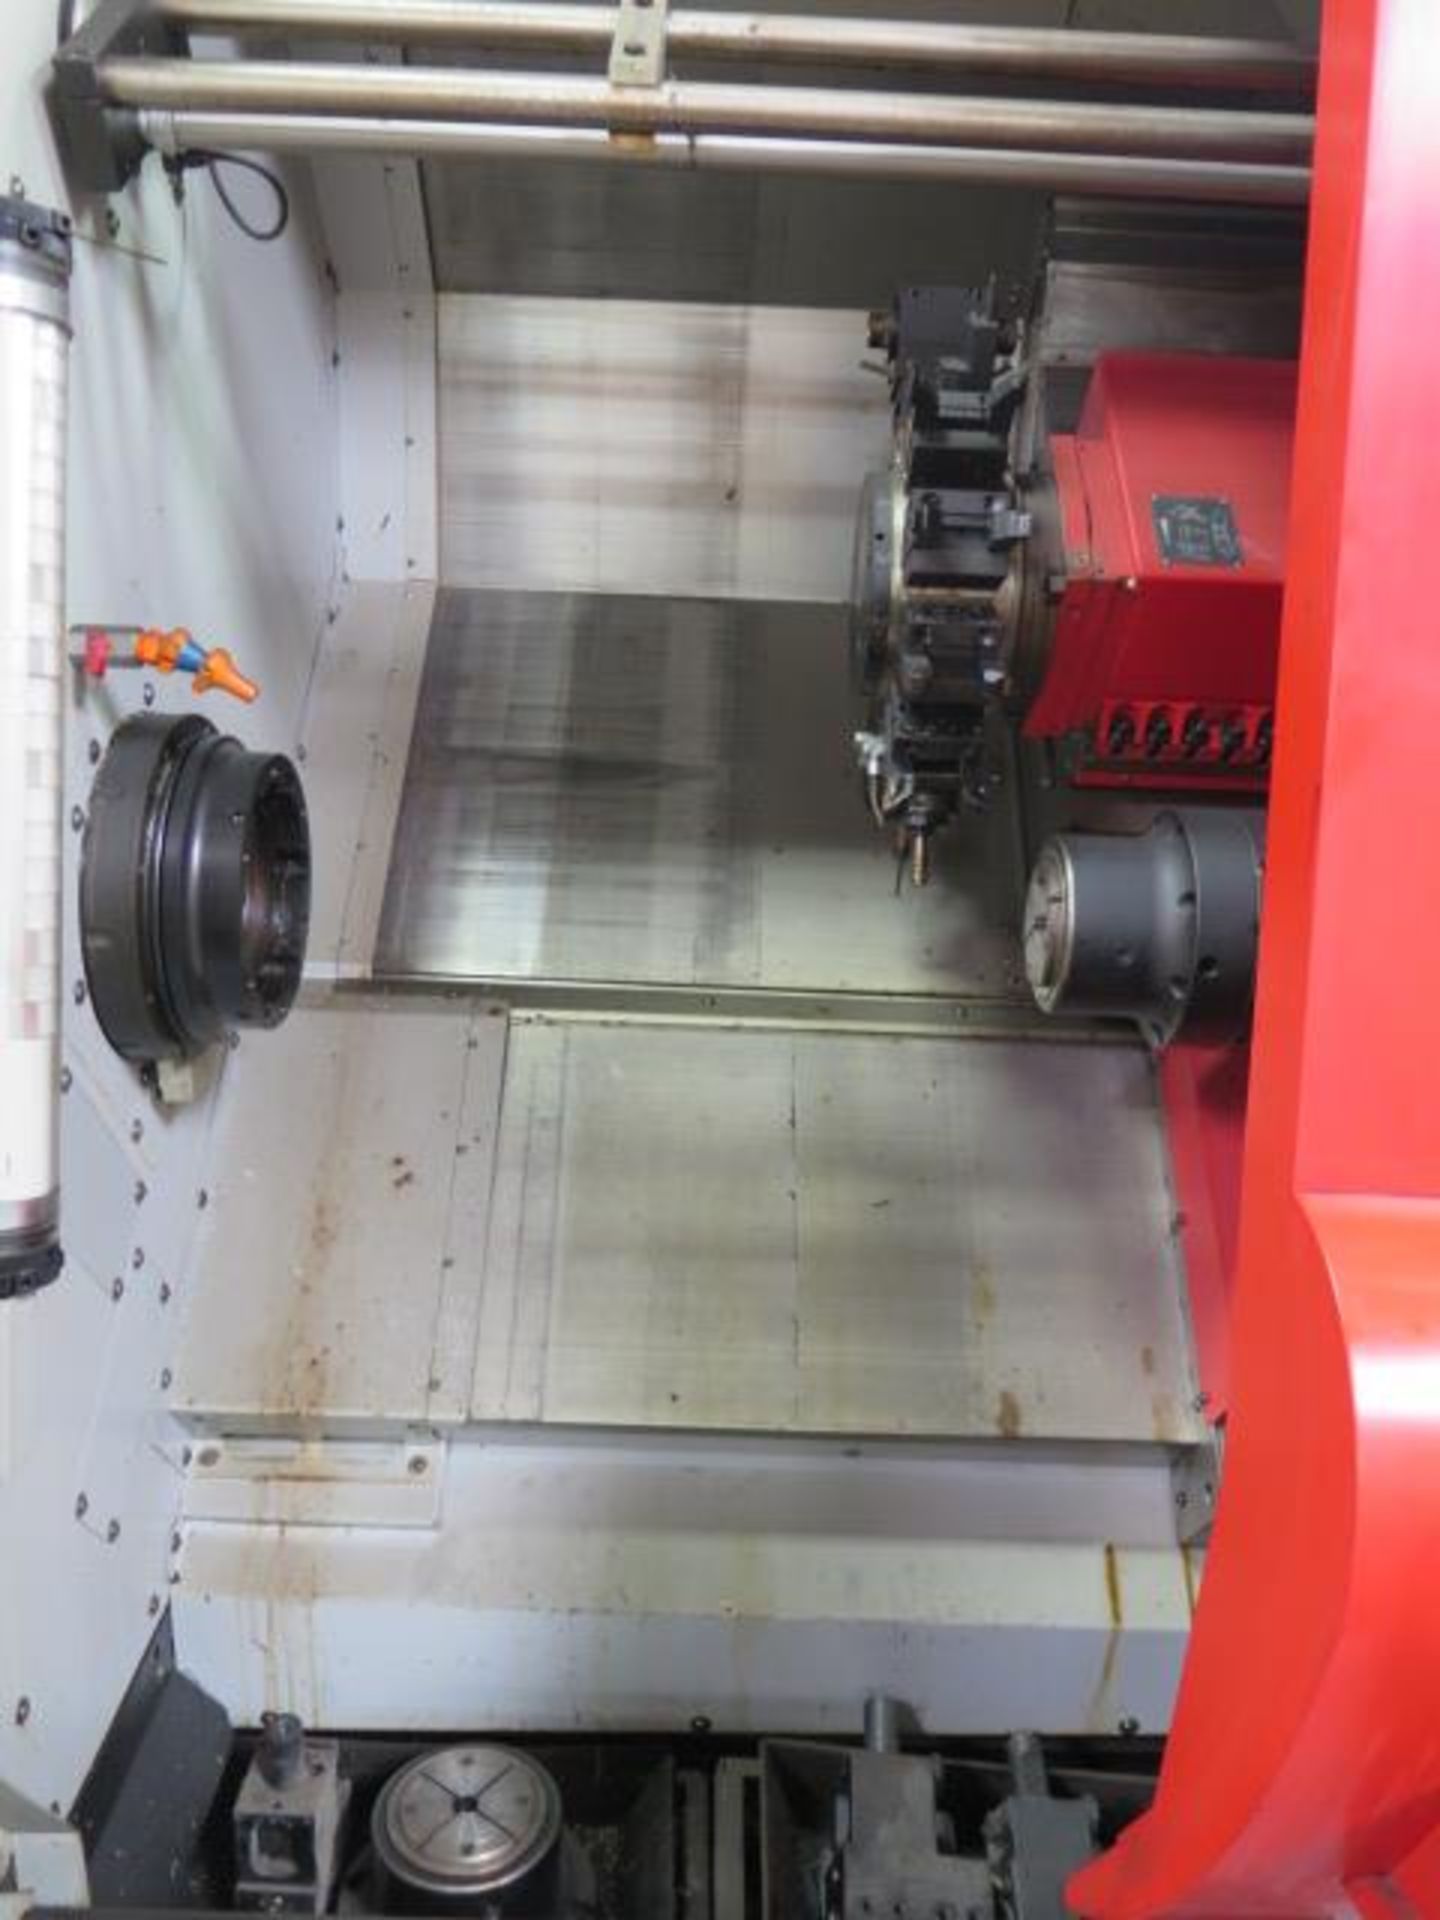 2007 Emco MaxxTurn 65 Twin Spindle, Live Turret CNC Turning Center s/n S6F-V03/S6BV-2559, SOLD AS IS - Image 5 of 16